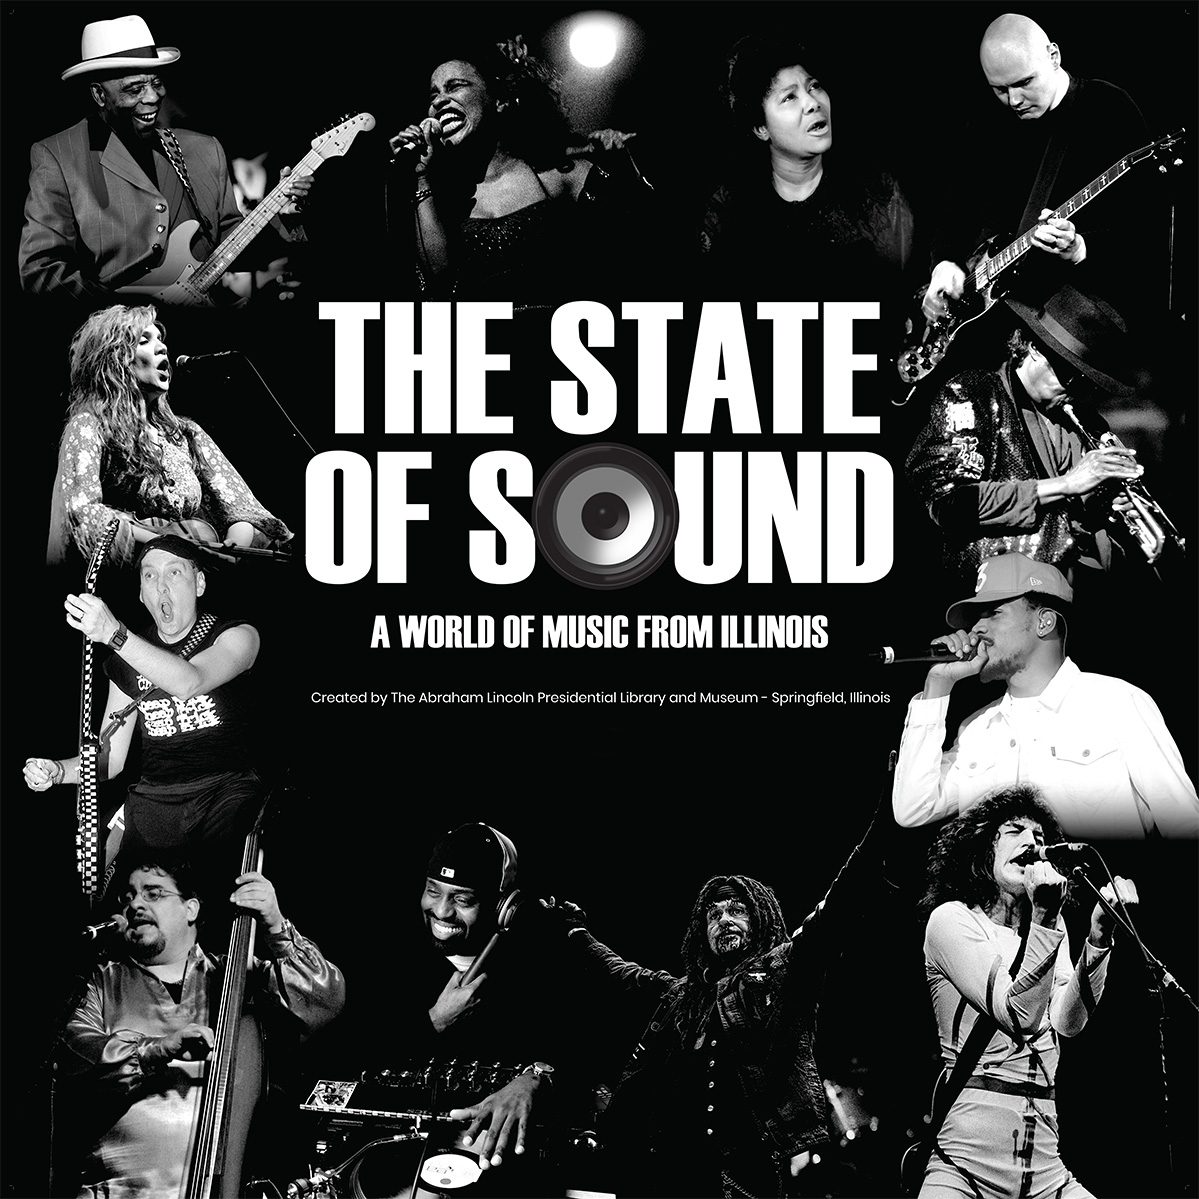 The State of Sound: A World of Music from Illinois